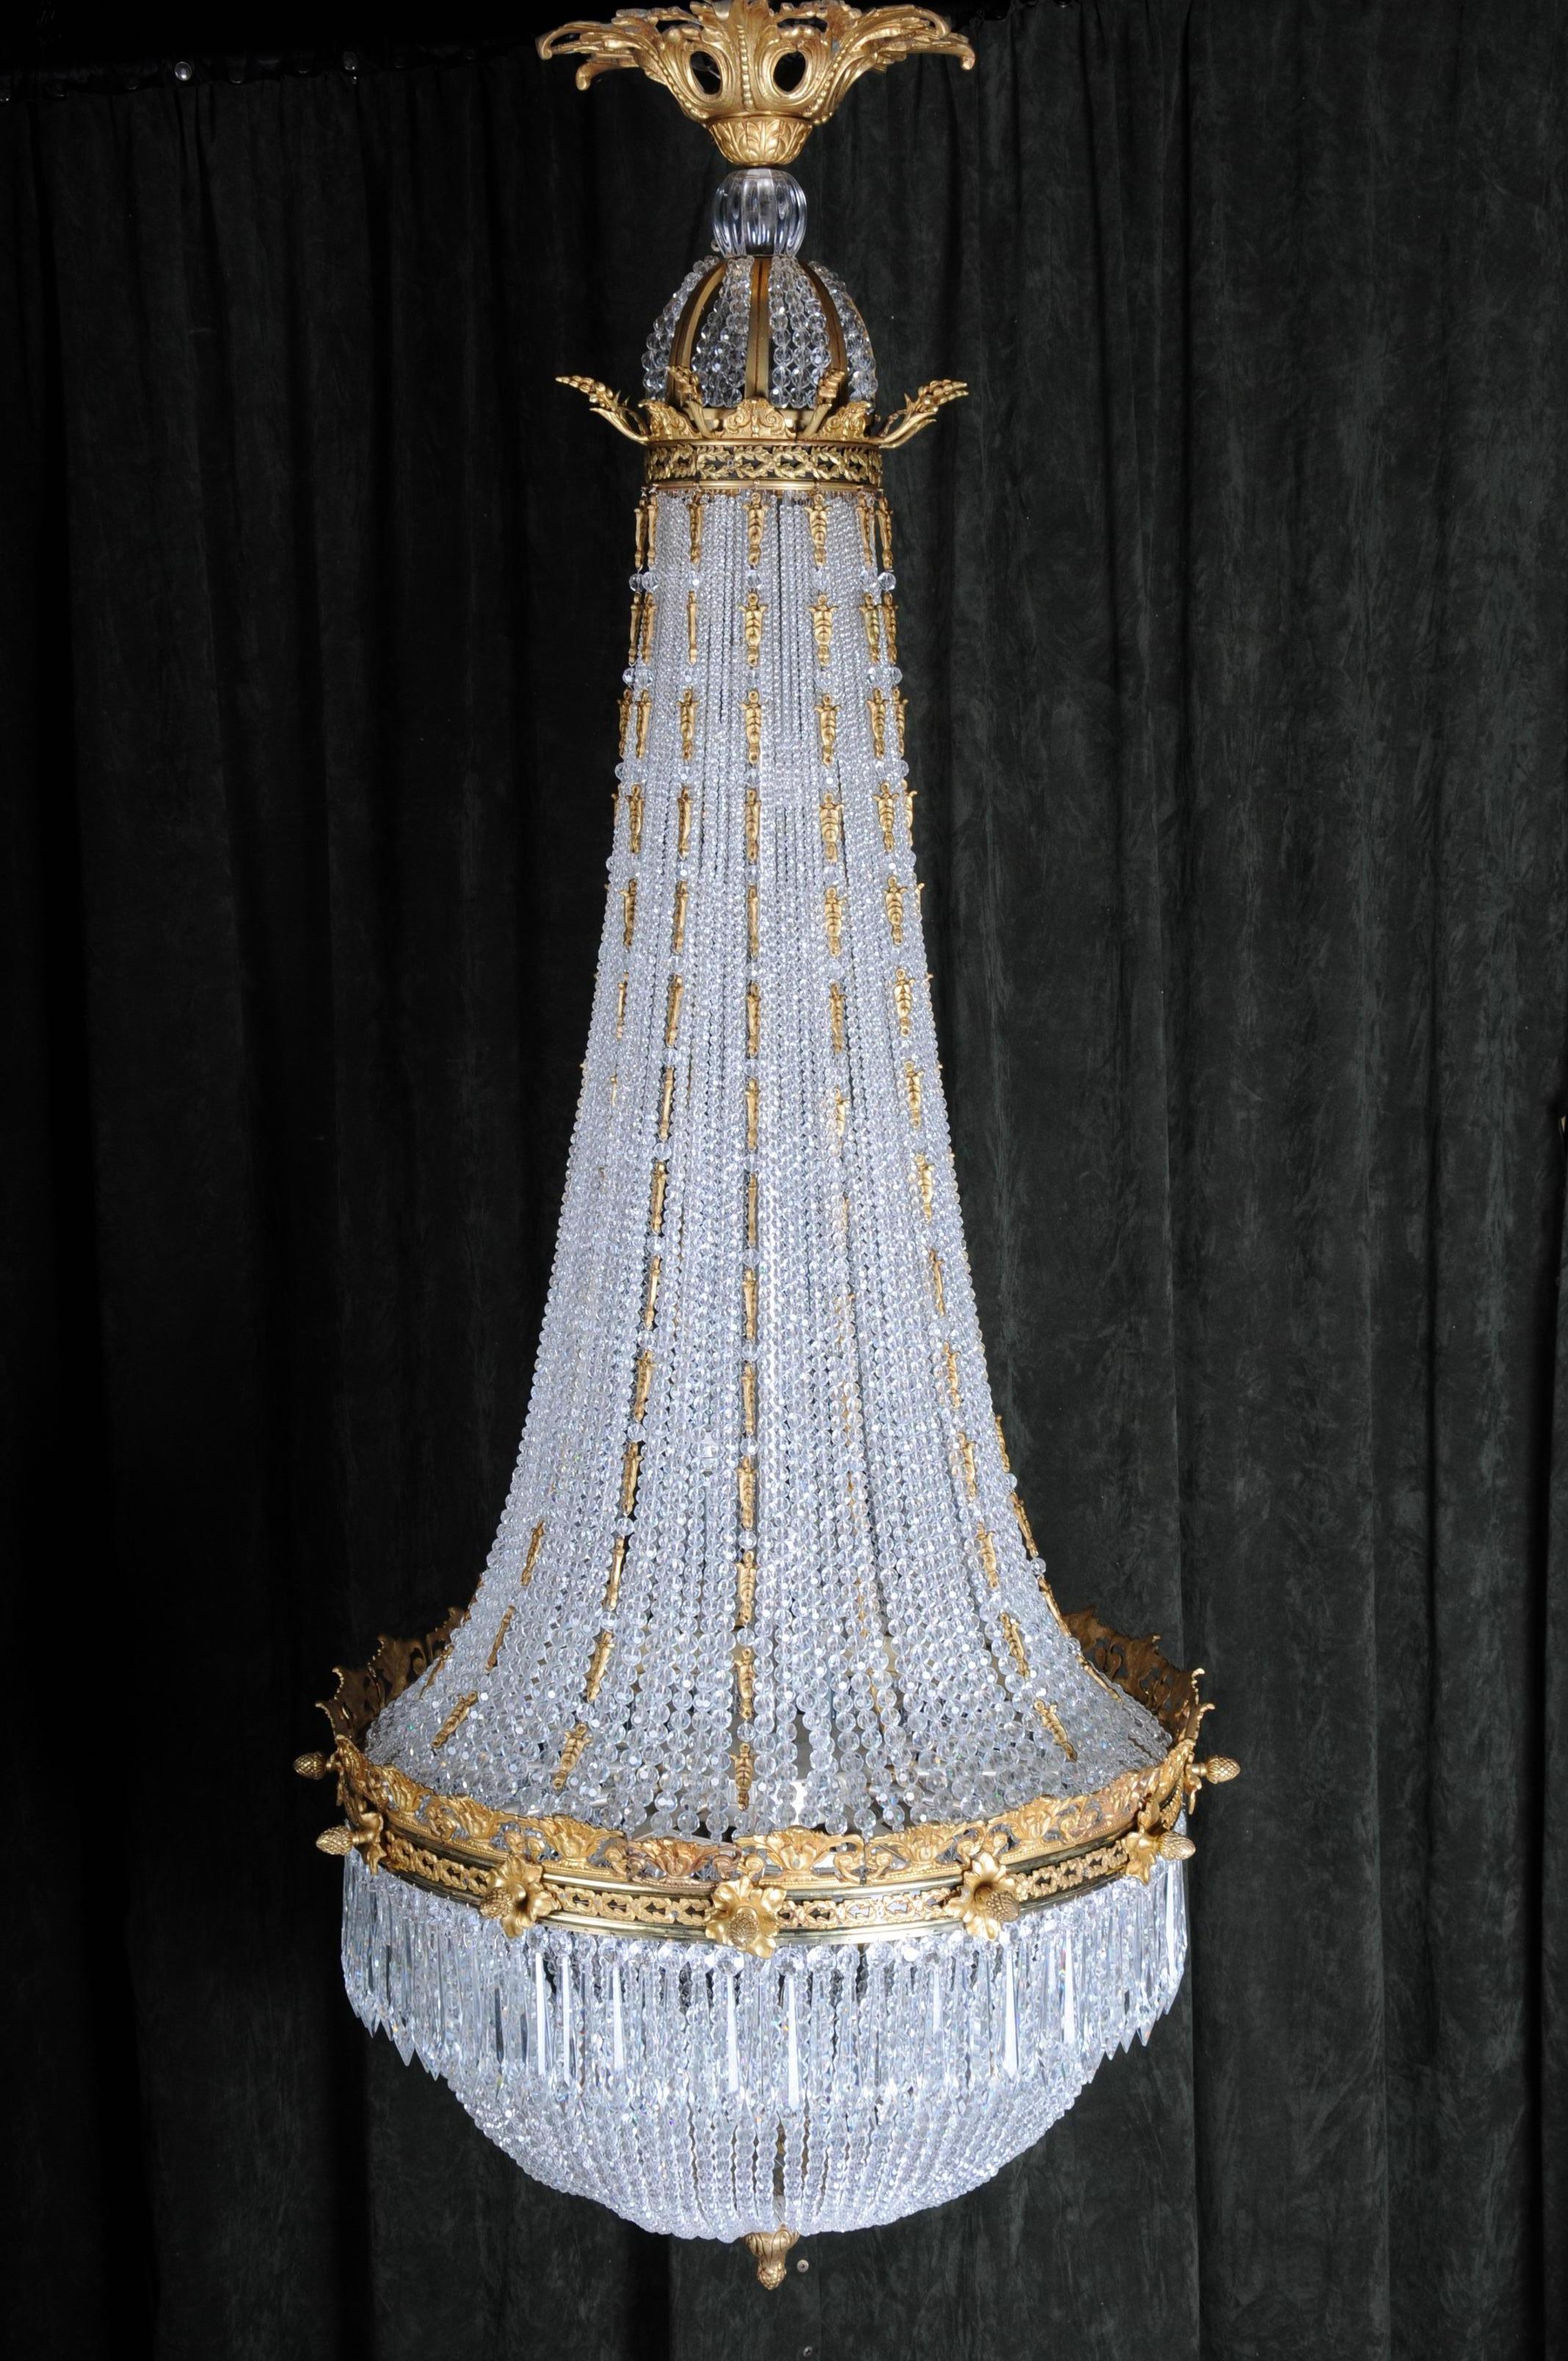 Monumental splendid Classicist ceiling candelabra/chandelier Empire style

Fine, engraved and cast Bronze. Basket-formed corpus from hand-cut frenches ball prisms. Connected through wide, ornamental reliefed and broken hoop. Ending in Baldachin